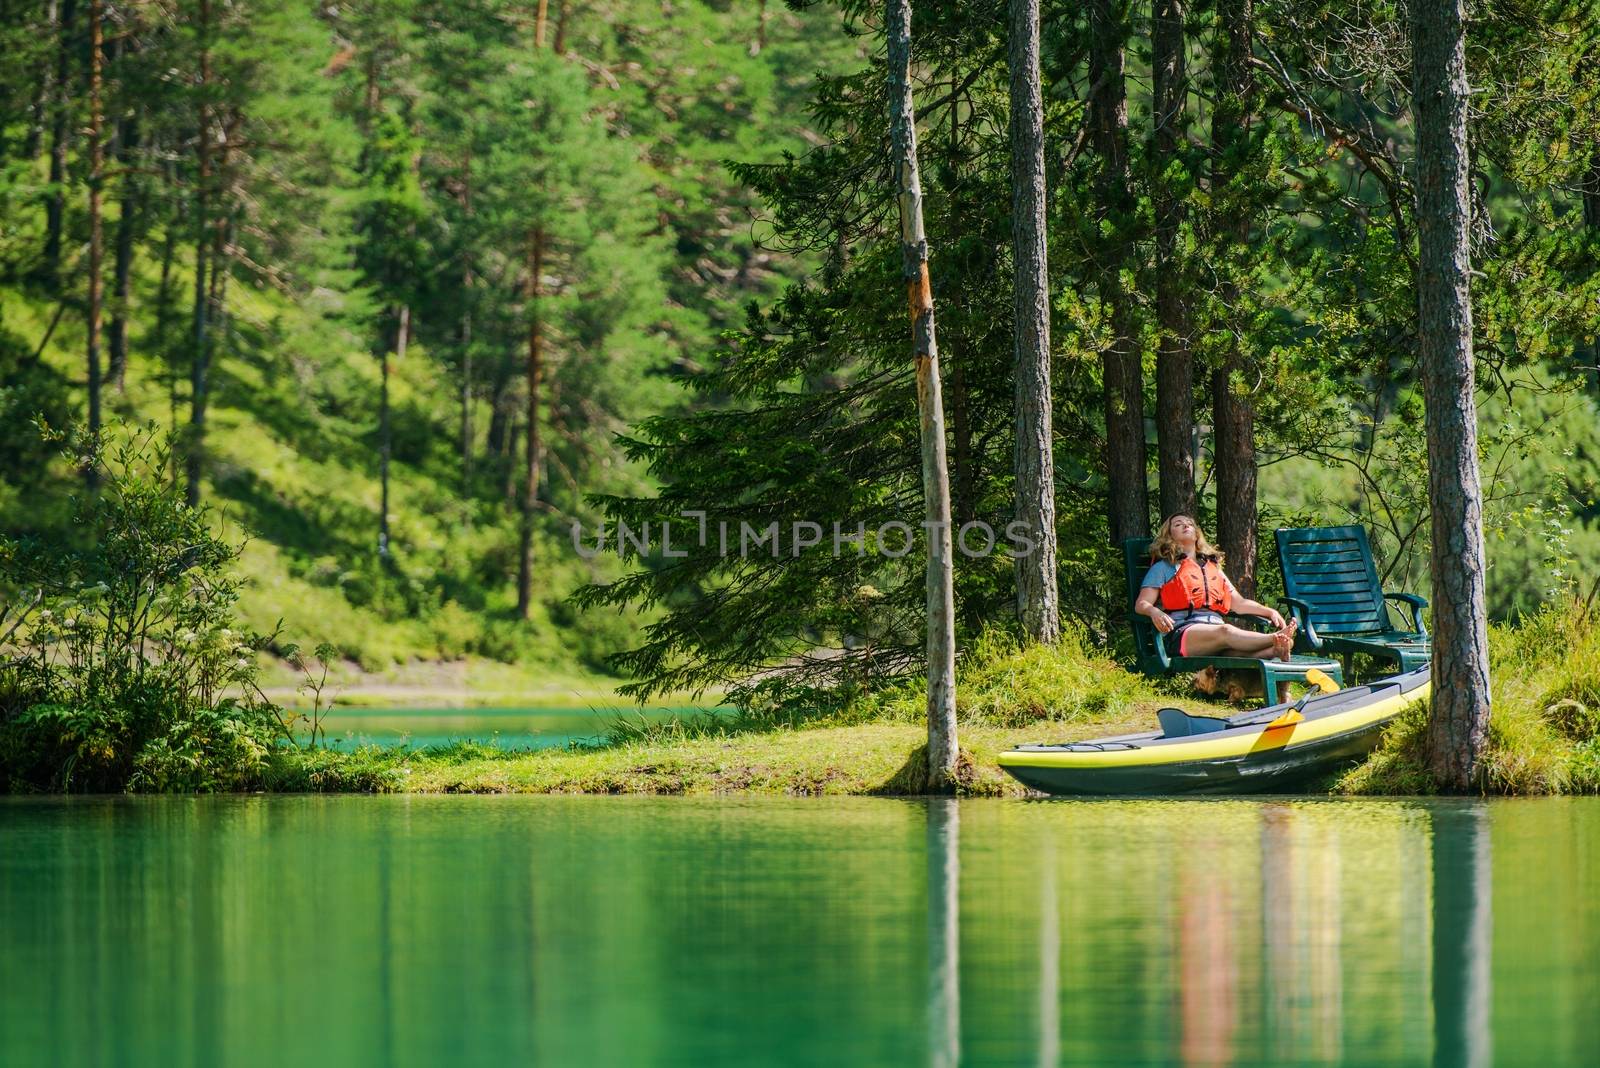 Vacation with the Kayak. Caucasian Woman in Her 30s Relaxing on the Small Lake Island.